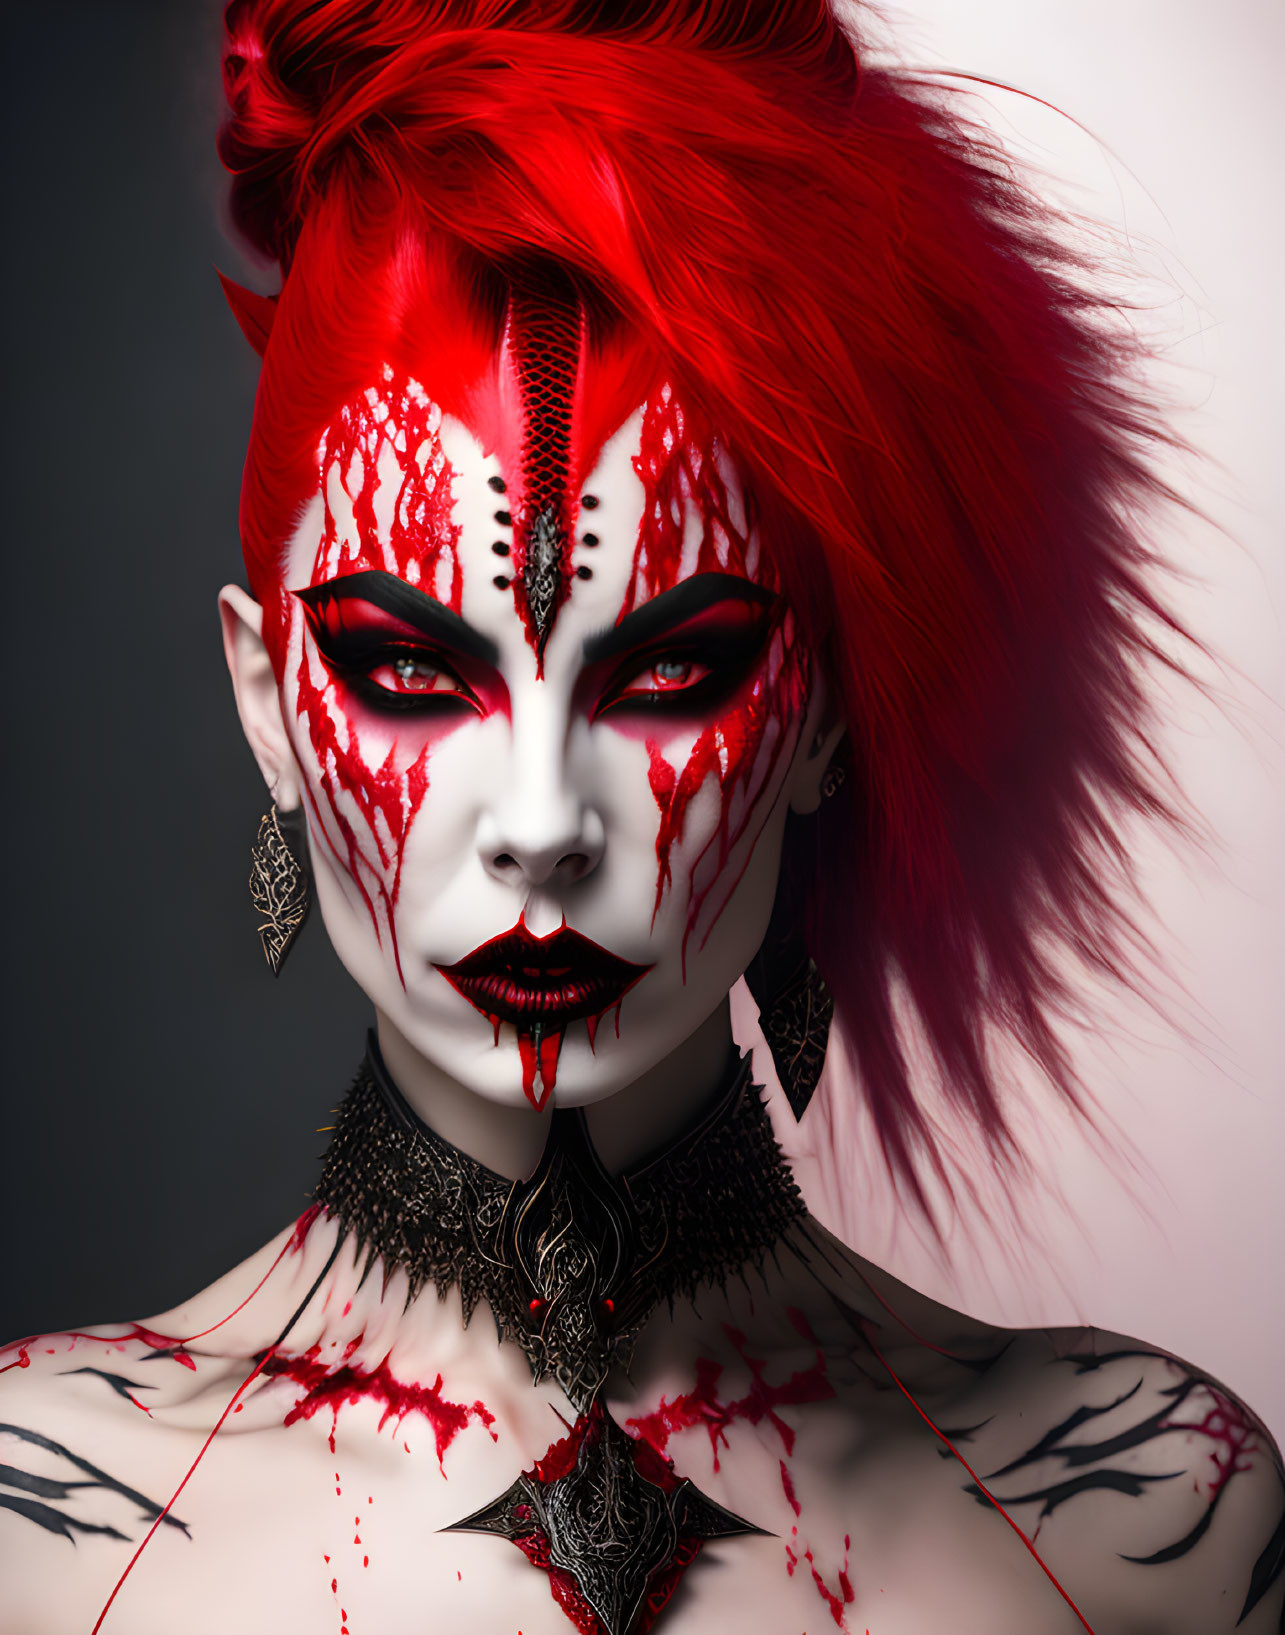 Vivid portrait of person with red hair and dramatic makeup, adorned with red and black designs and orn